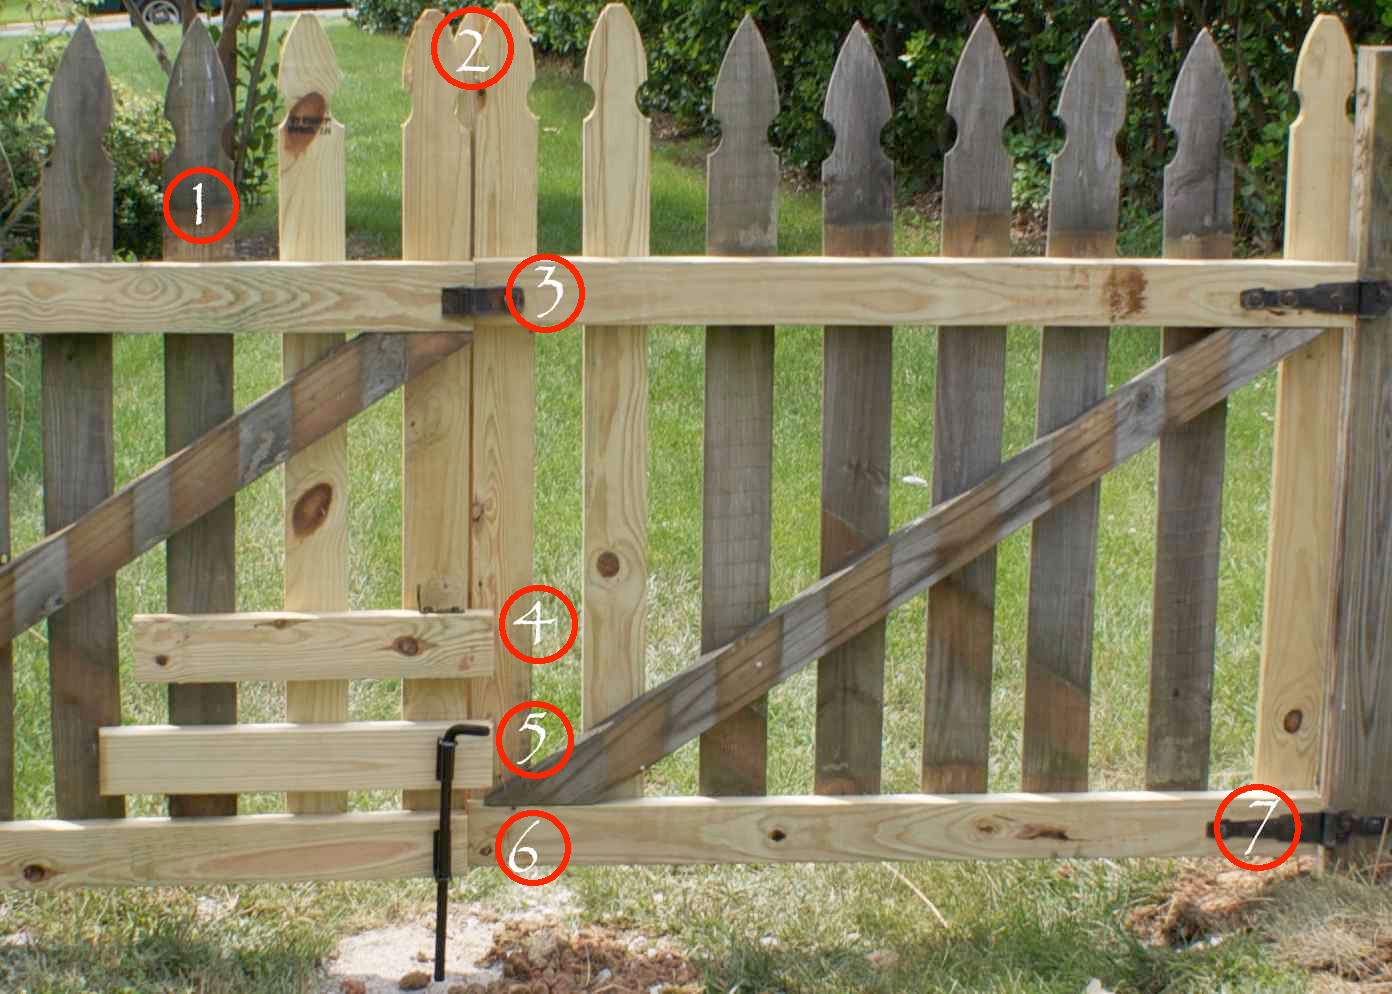 How to Build a Wooden Gate